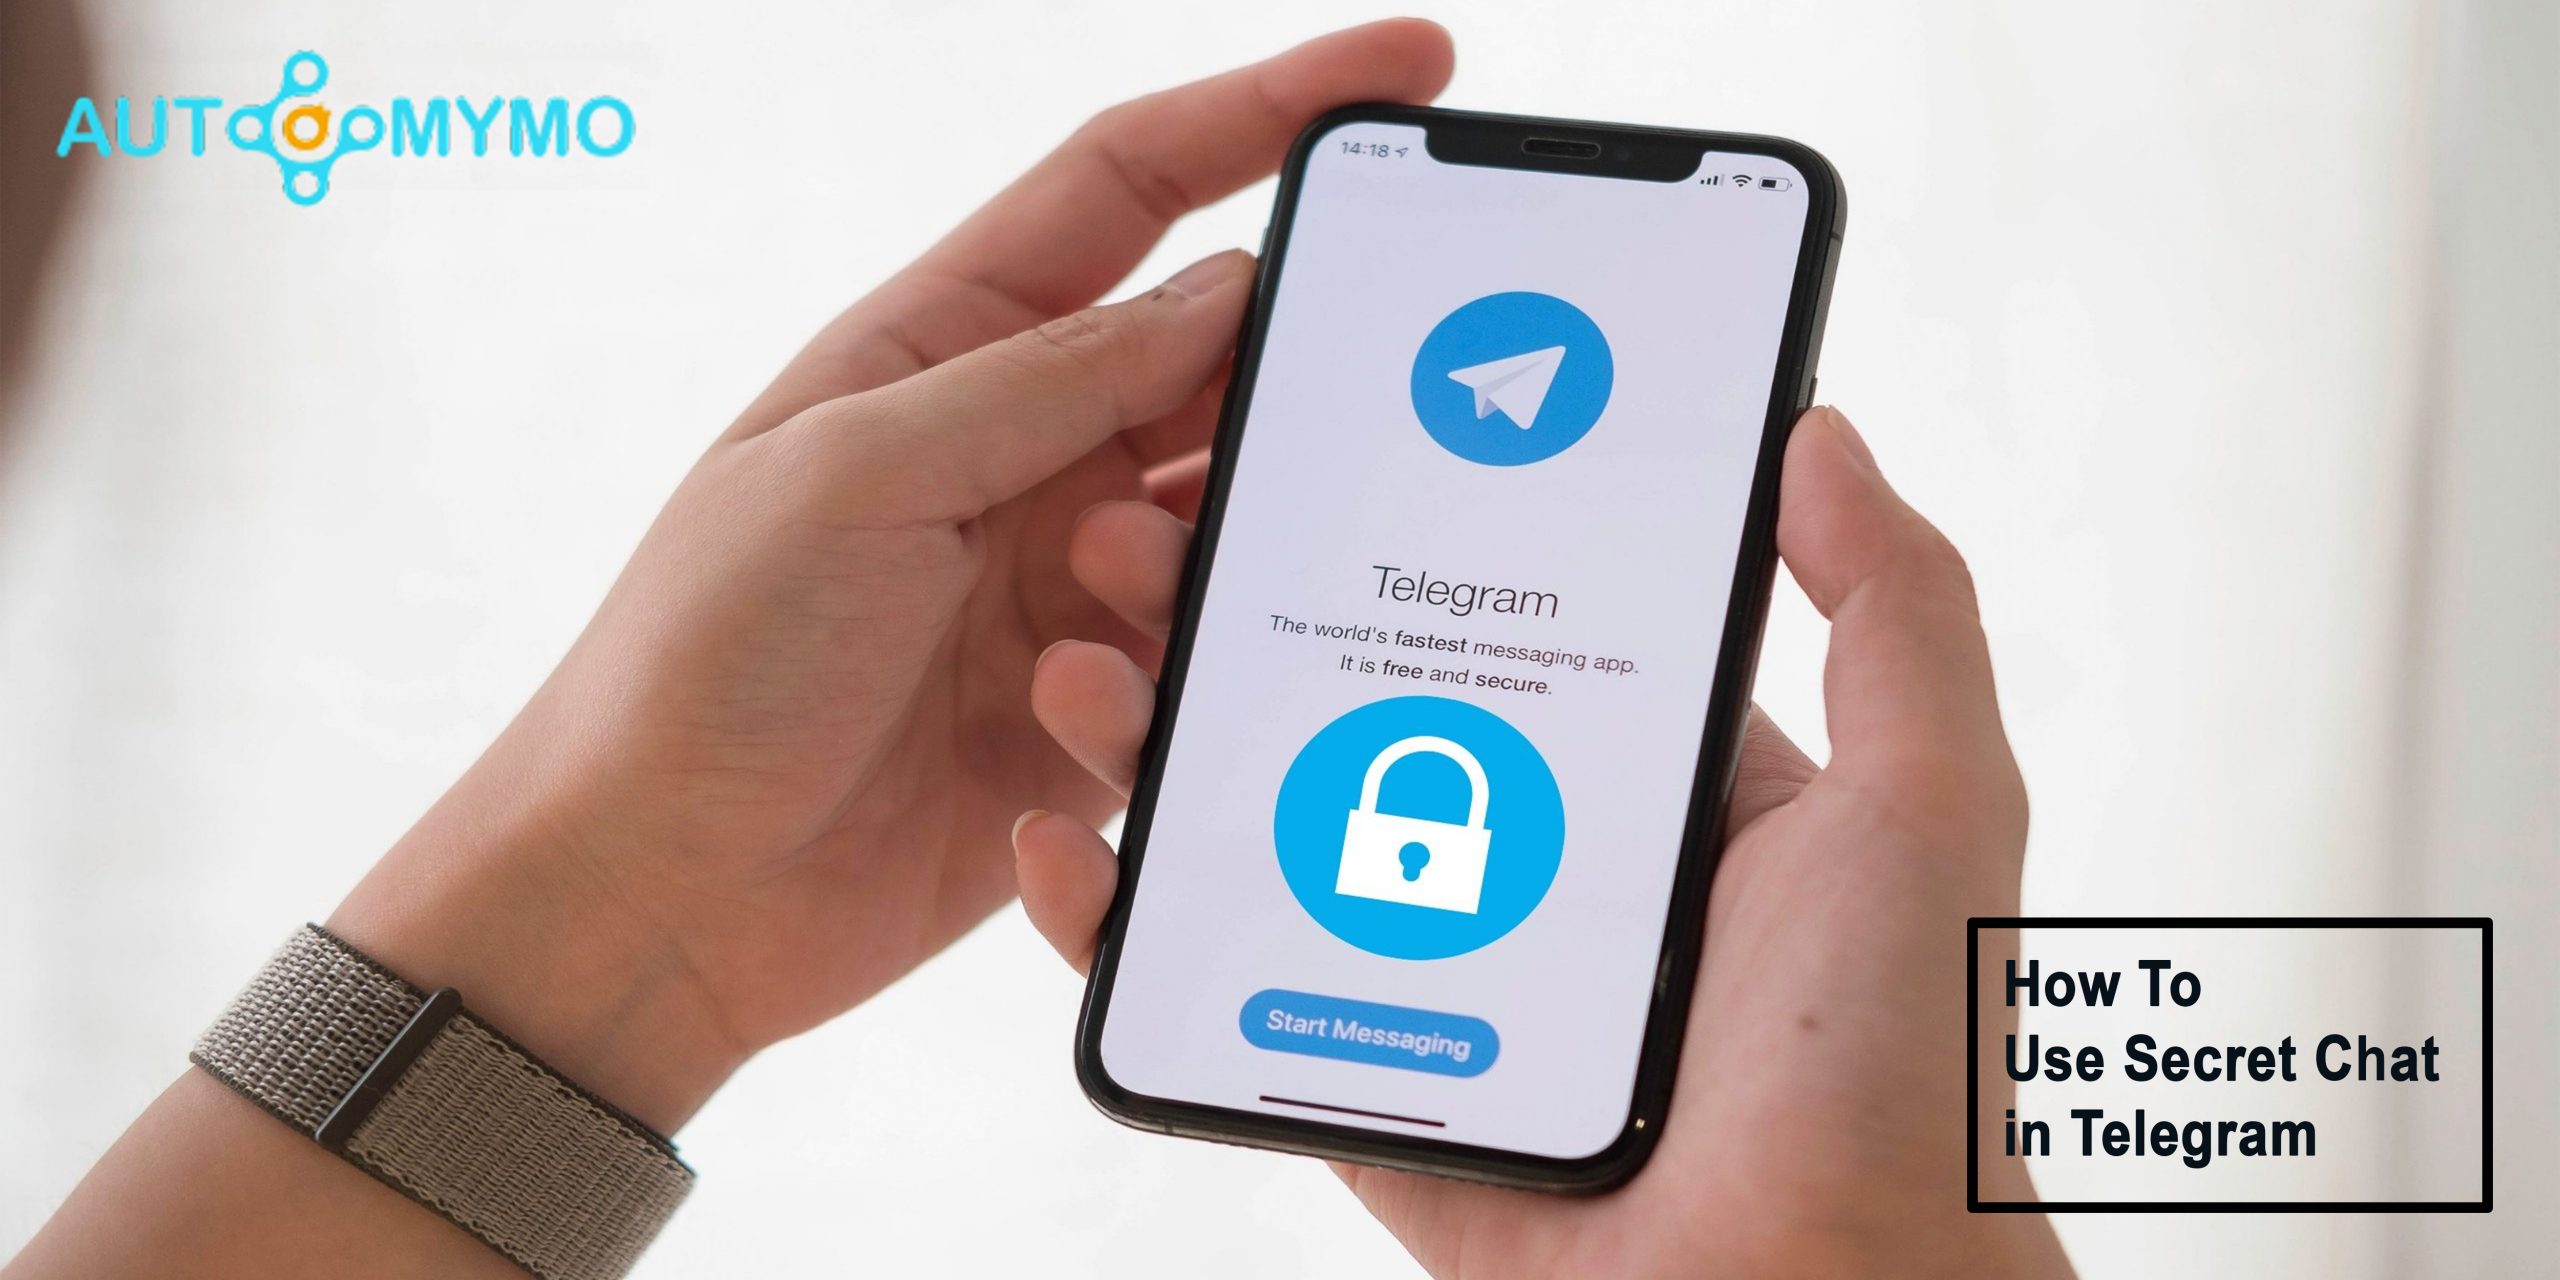 How To Use Secret Chat in Telegram